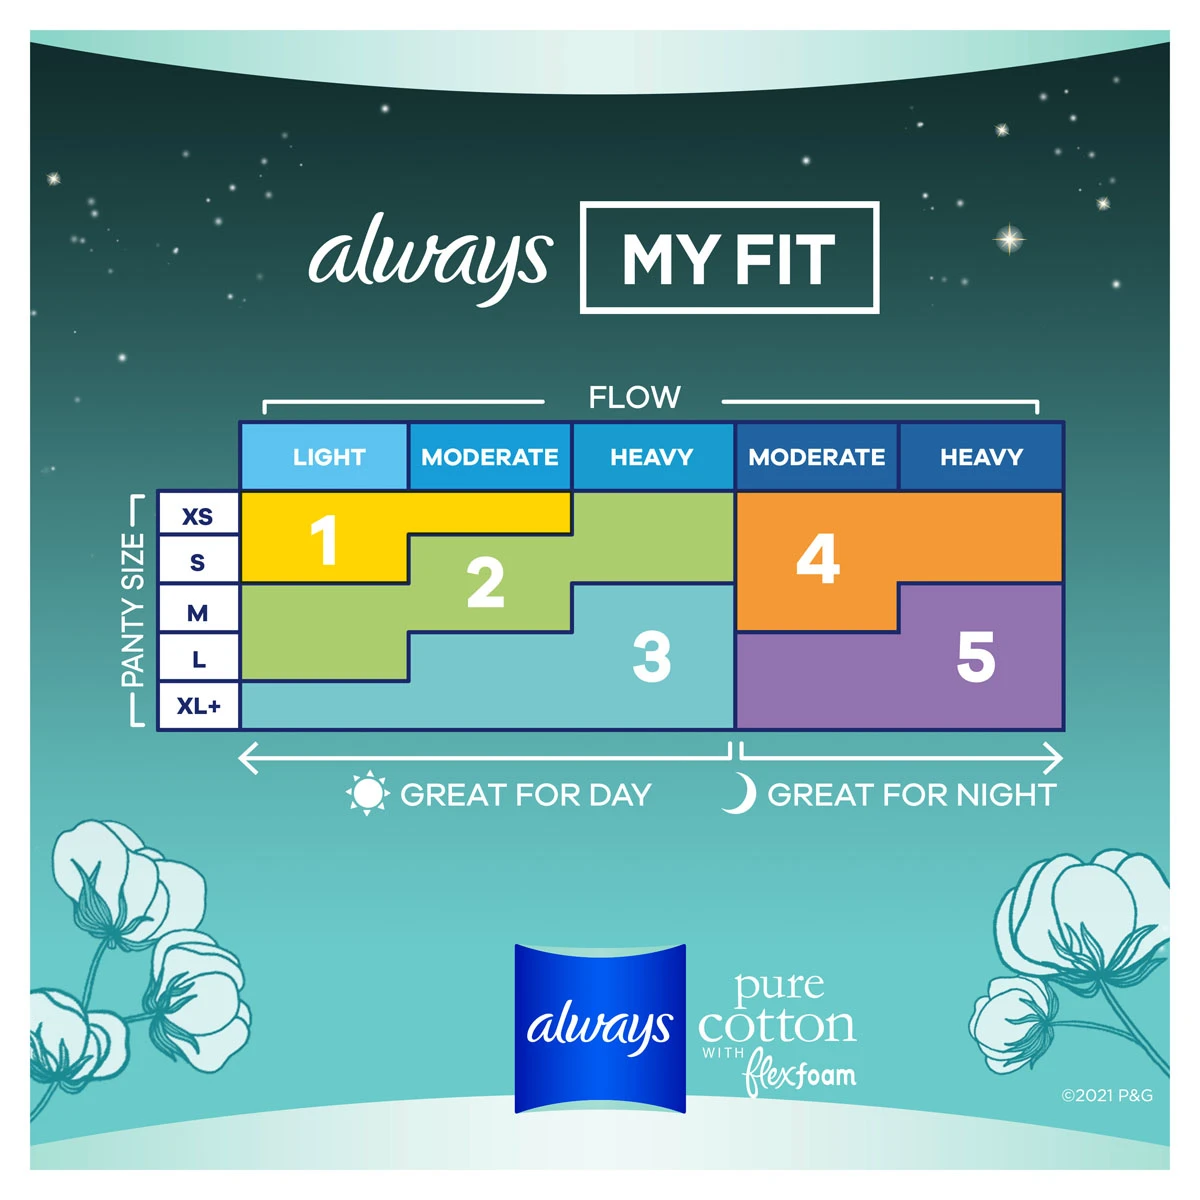 Always-Pure Cotton-Night-My-Fit